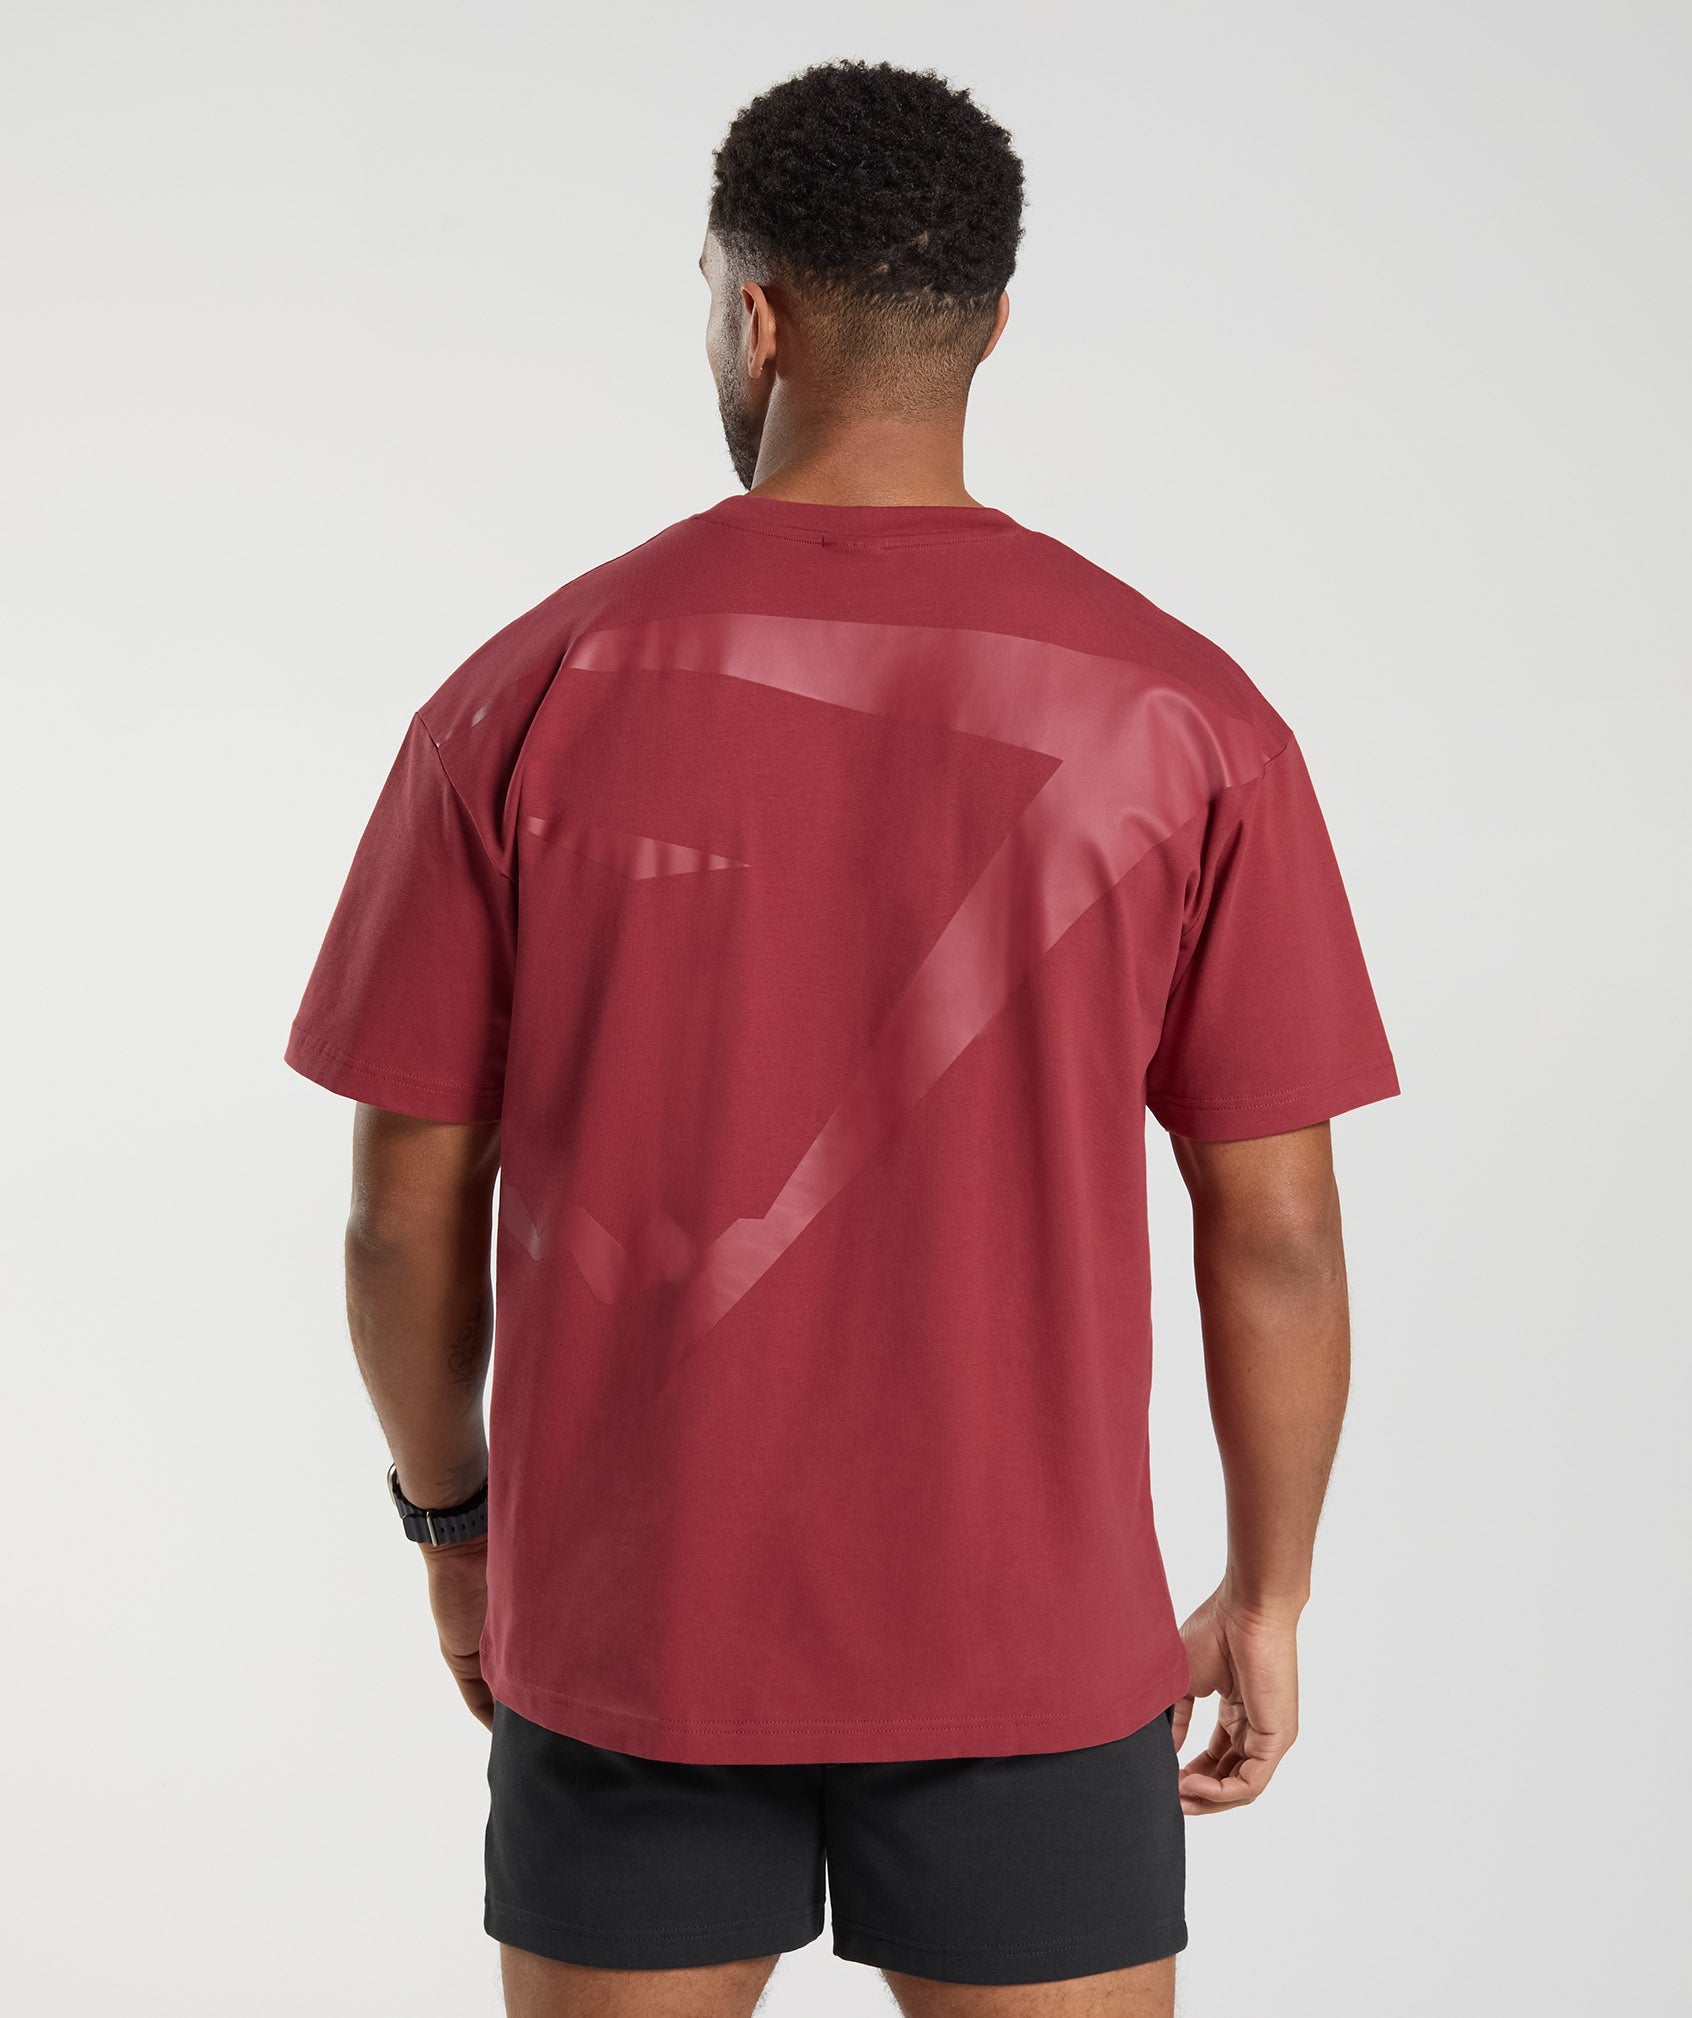 Oversized Sharkhead T-Shirt in Pomegranate Red - view 1